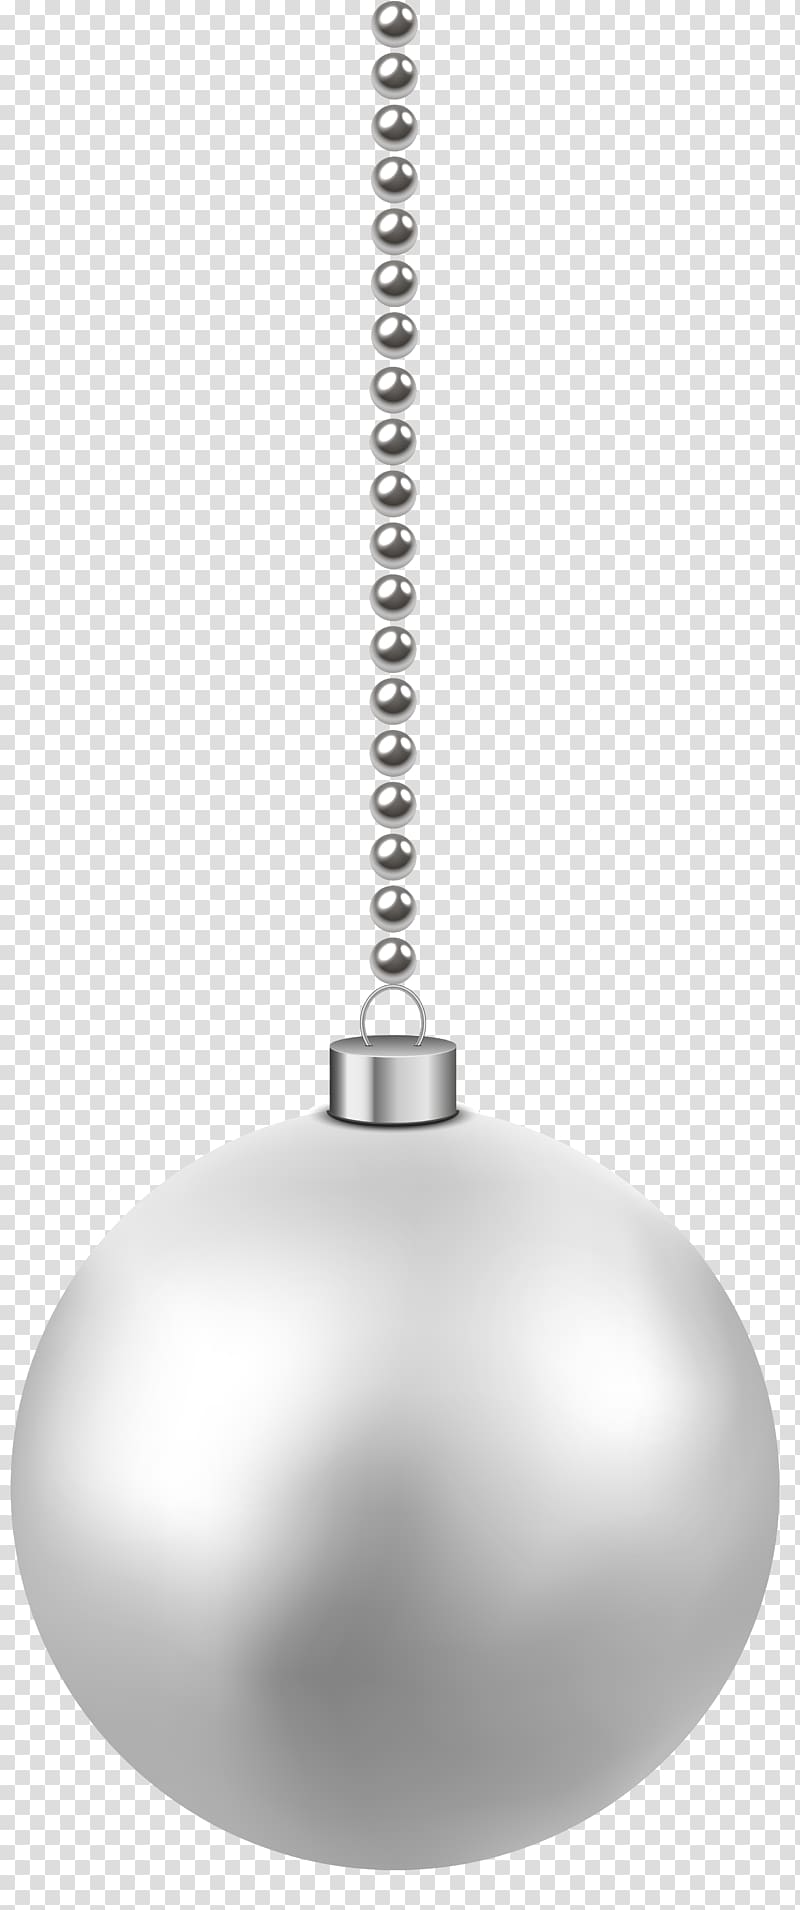 silver Christmas bauble , Black and white Lighting Light fixture, White Christmas Hanging Ball transparent background PNG clipart